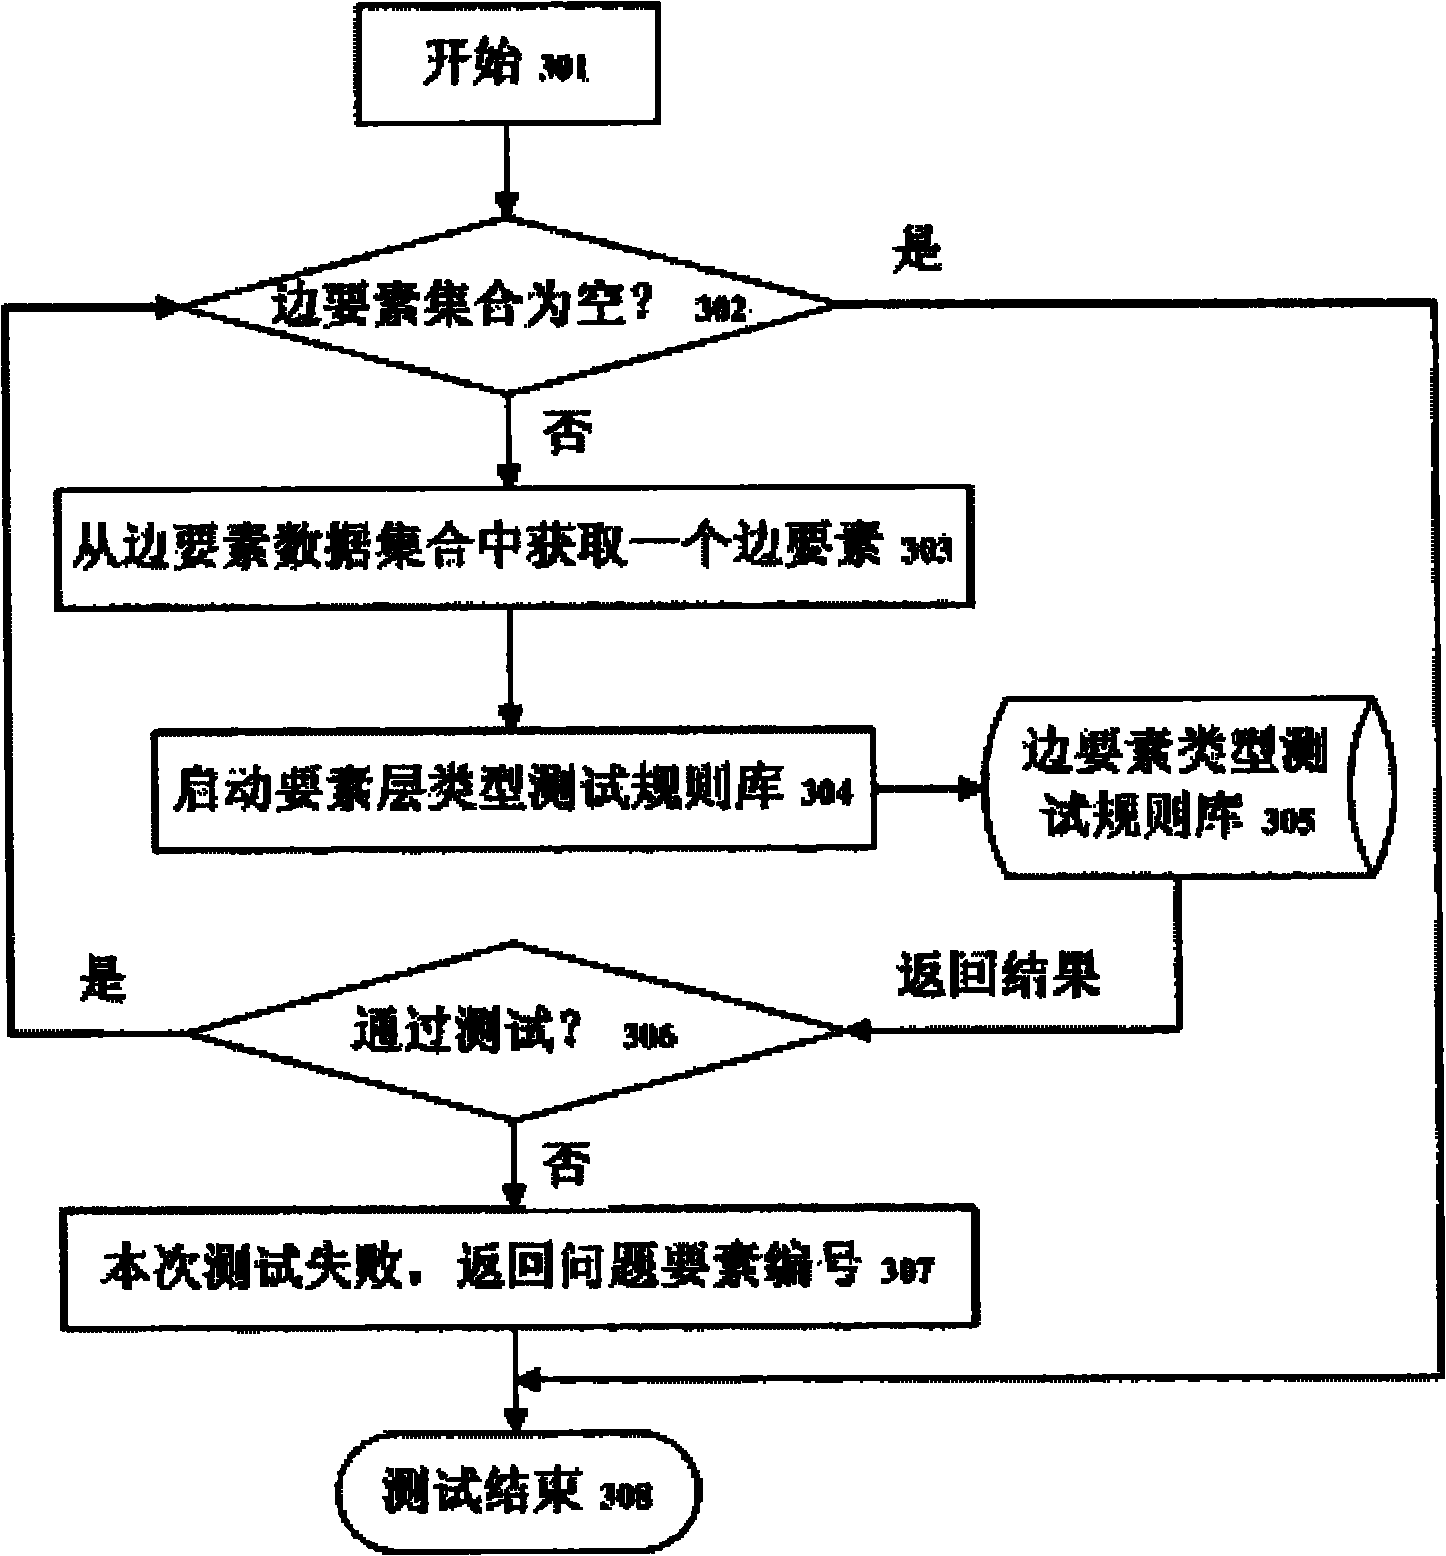 Highway network topological structure data model and path calculation method